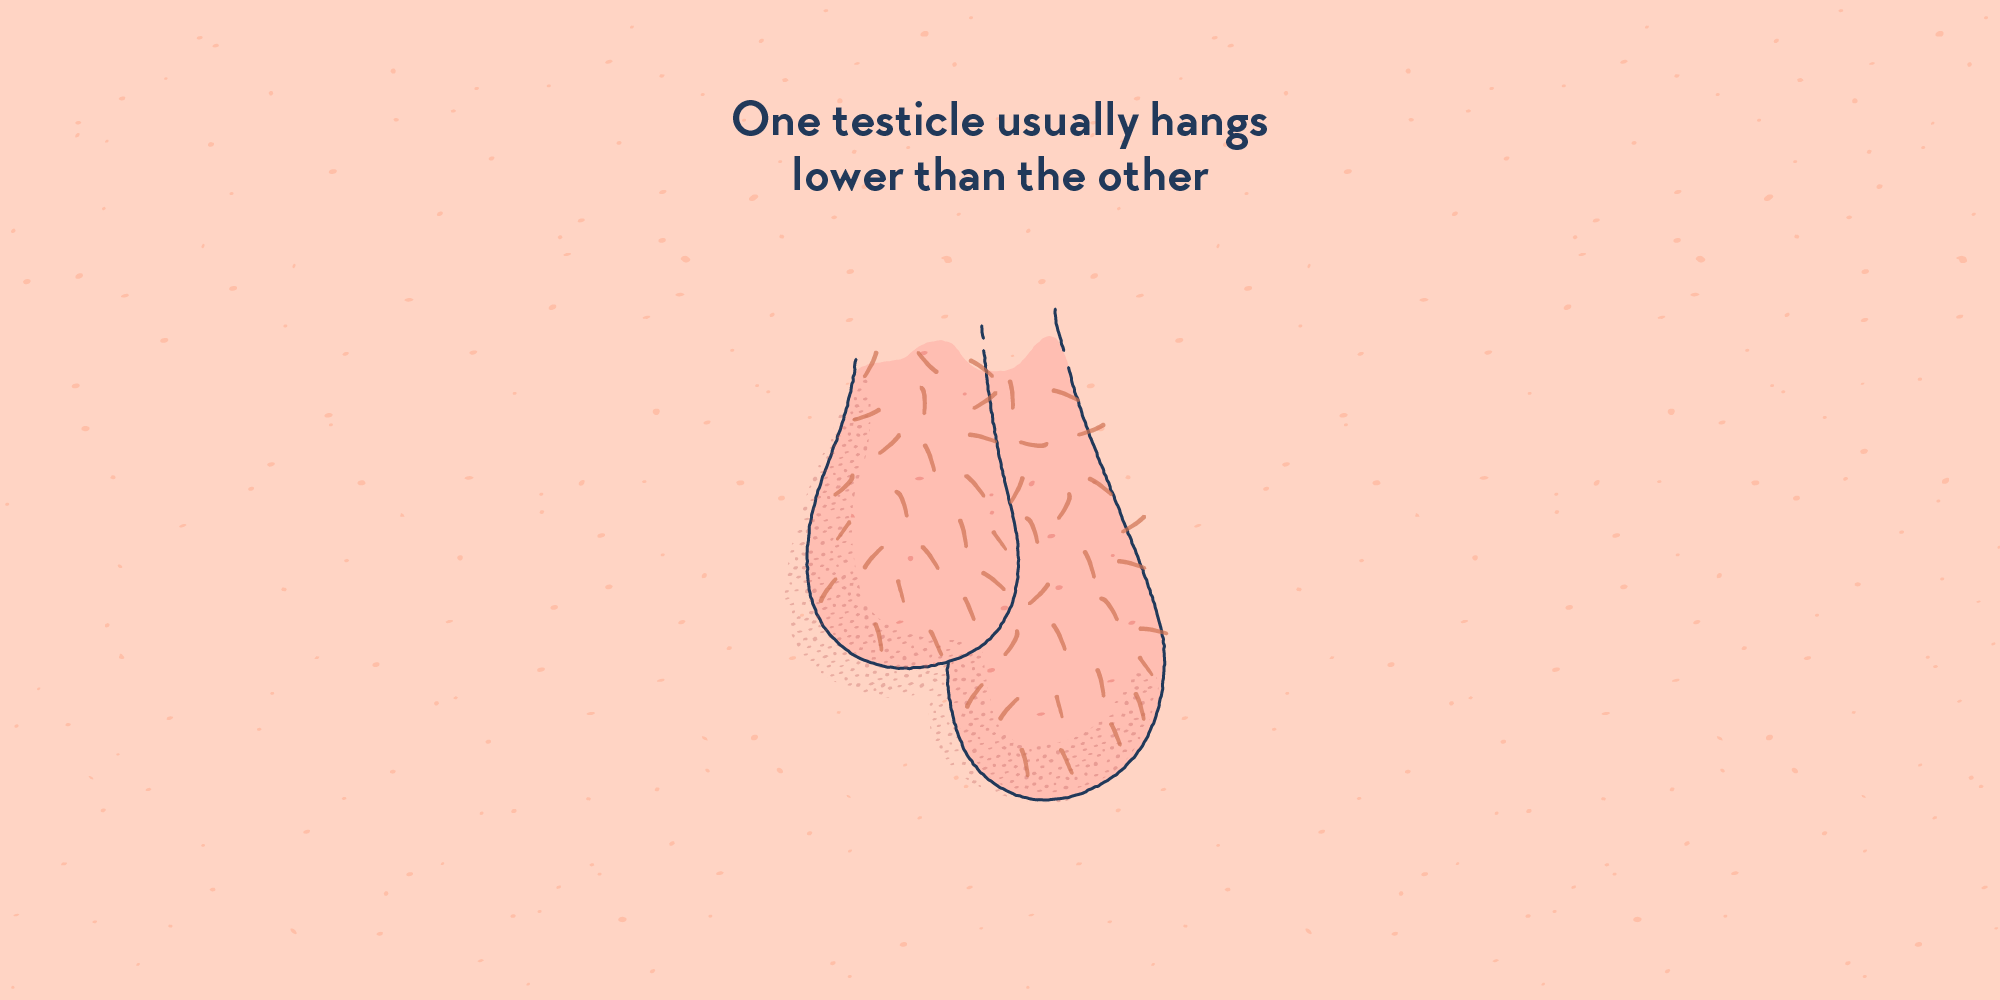 Two testicles, one hanging lower